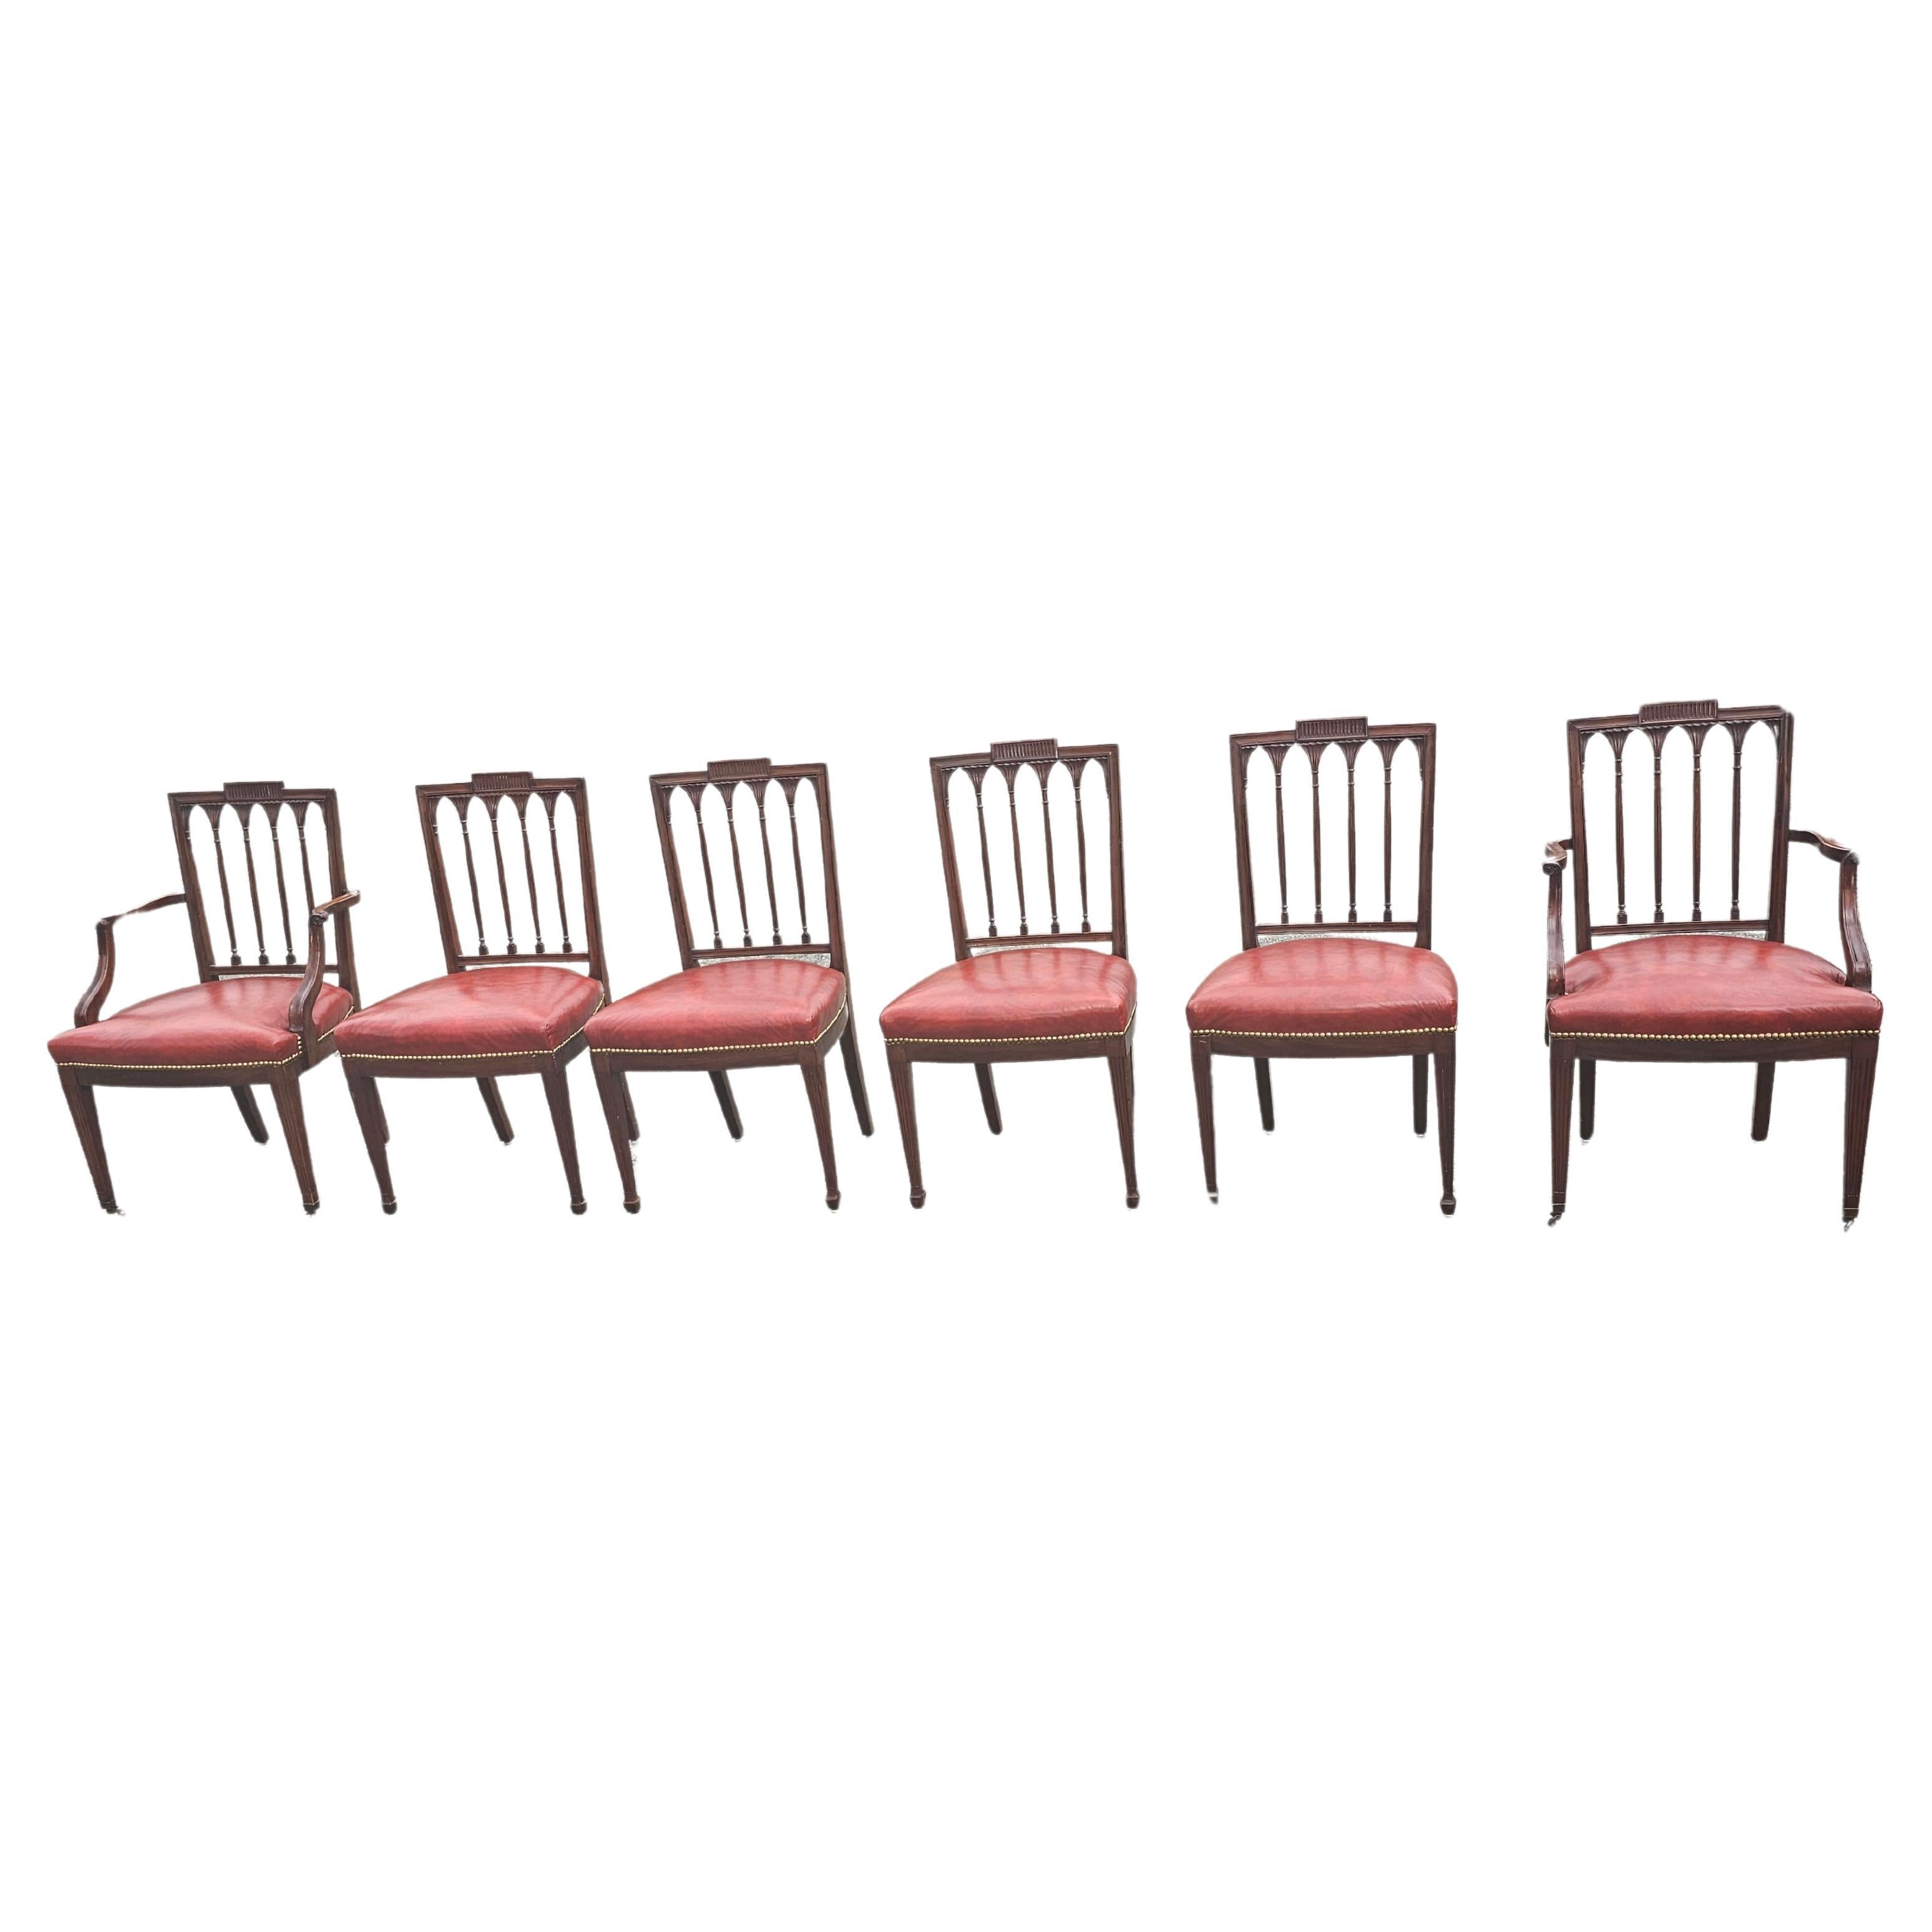 A Set Of Six George III Style Mahogany Leather Upholstered  seat Dining Chairs. Fine carvings on back. Nail gead trims. Very good vintage condition. No cracks on leather seat. Measures 22